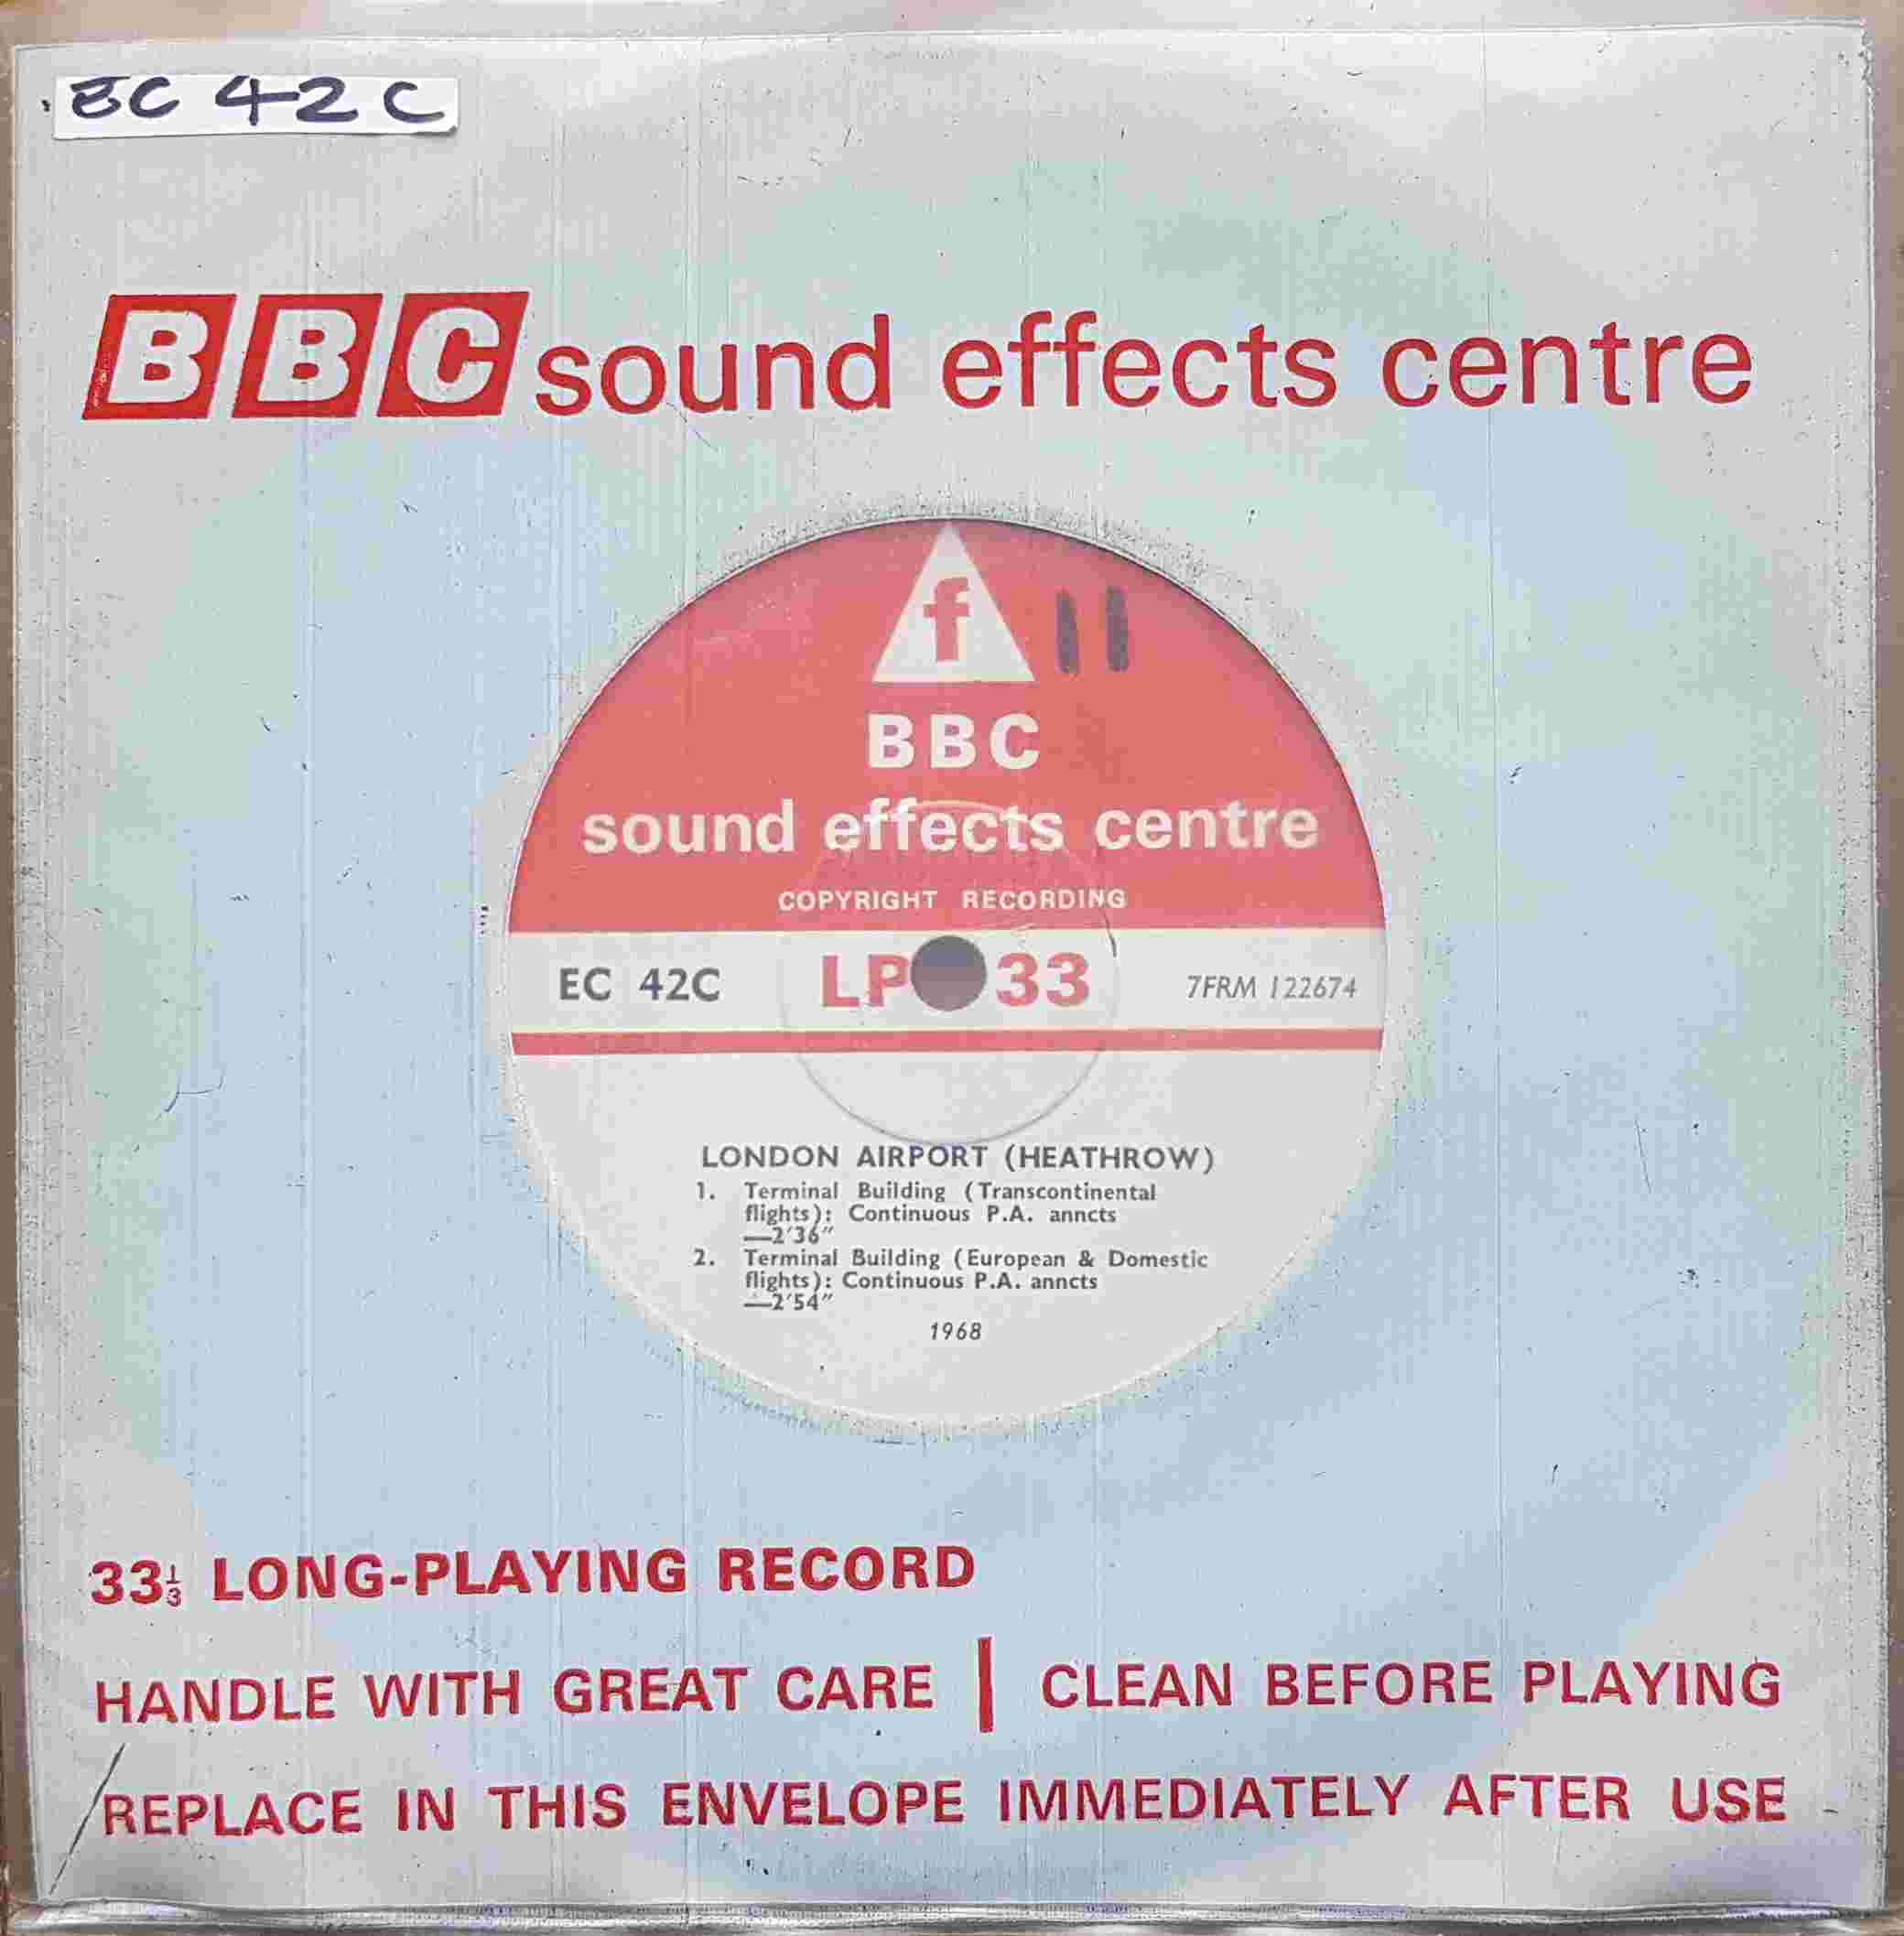 Picture of EC 42C London airport (Heathrow) -1968 single by artist Not registered from the BBC records and Tapes library